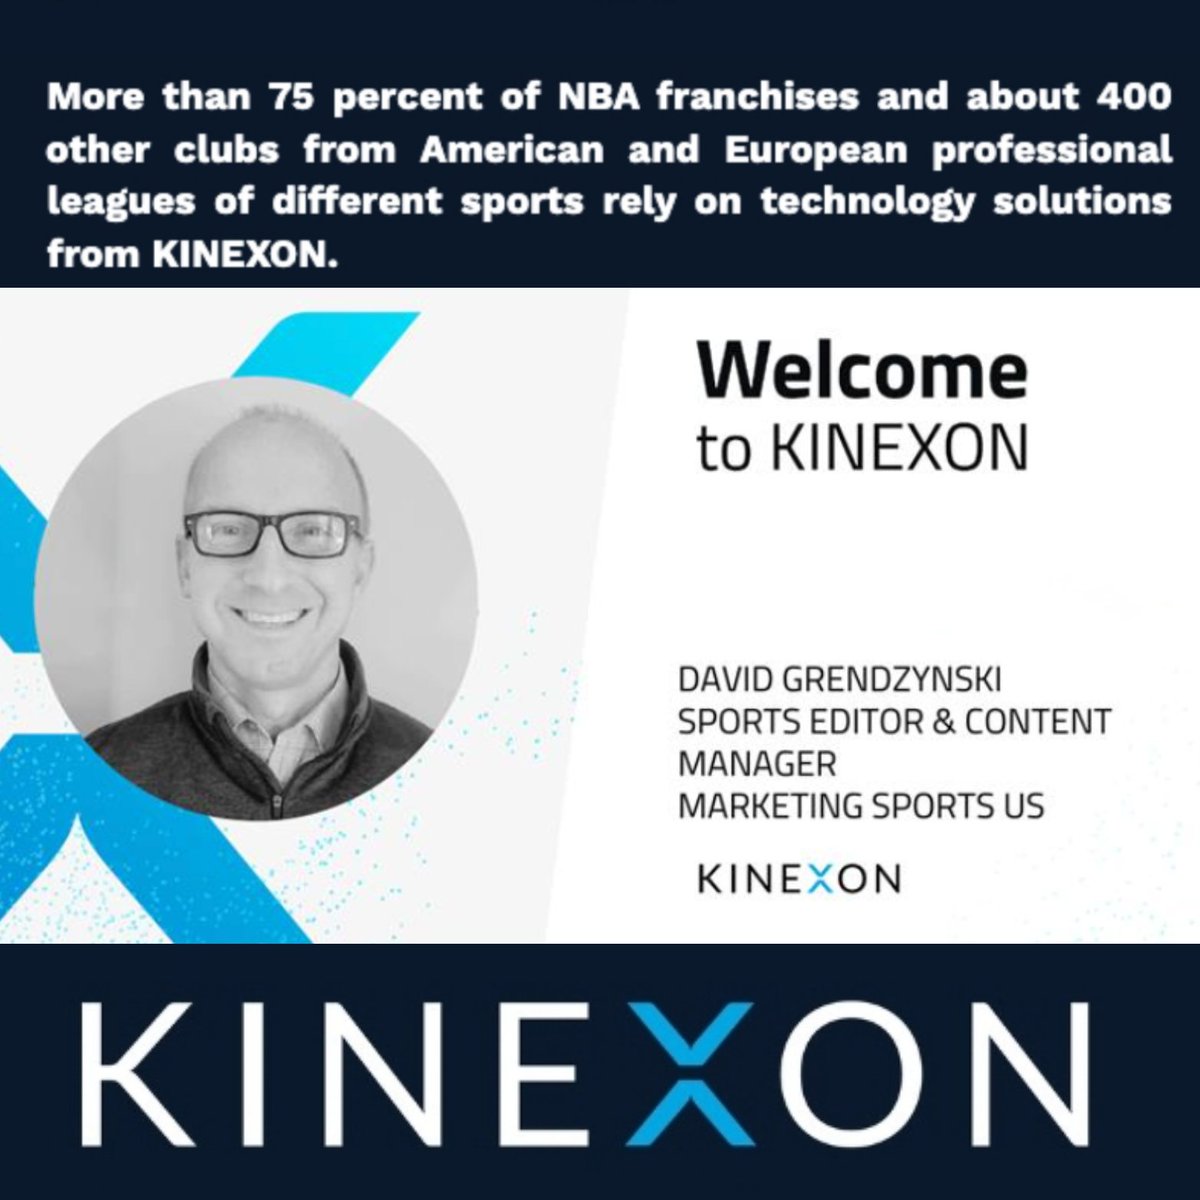 Thank you! #loadmanagement #playertracking #playerprotection #coaches #Trainers #strength #conditioning #sports #Science #DataAnalytics #highschool #colleges #Professional
kinexon.com/sports/